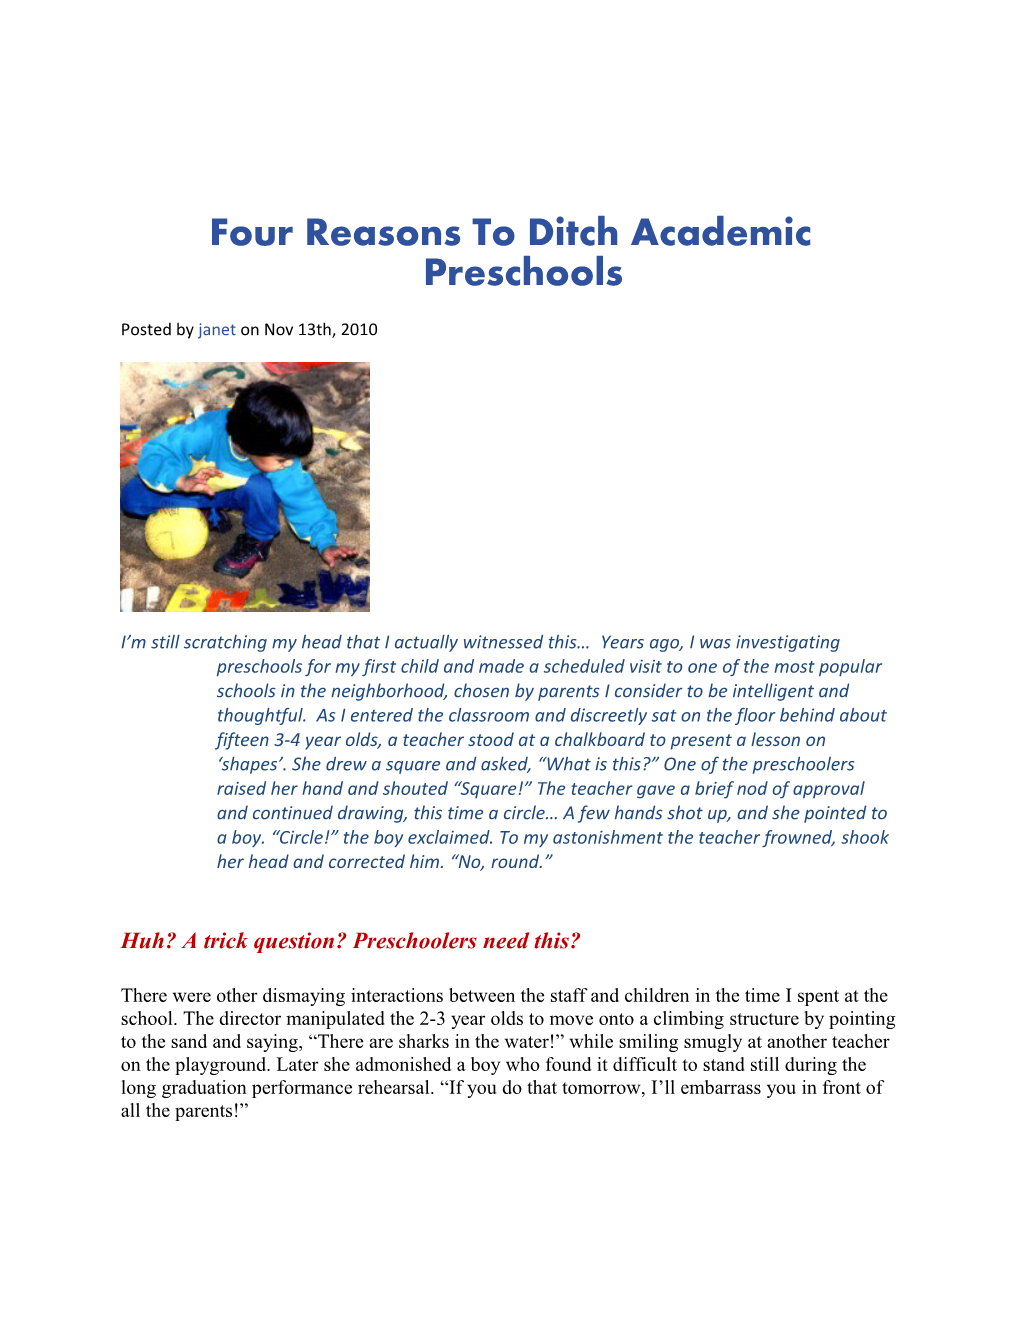 Four Reasons to Ditch Academic Preschools